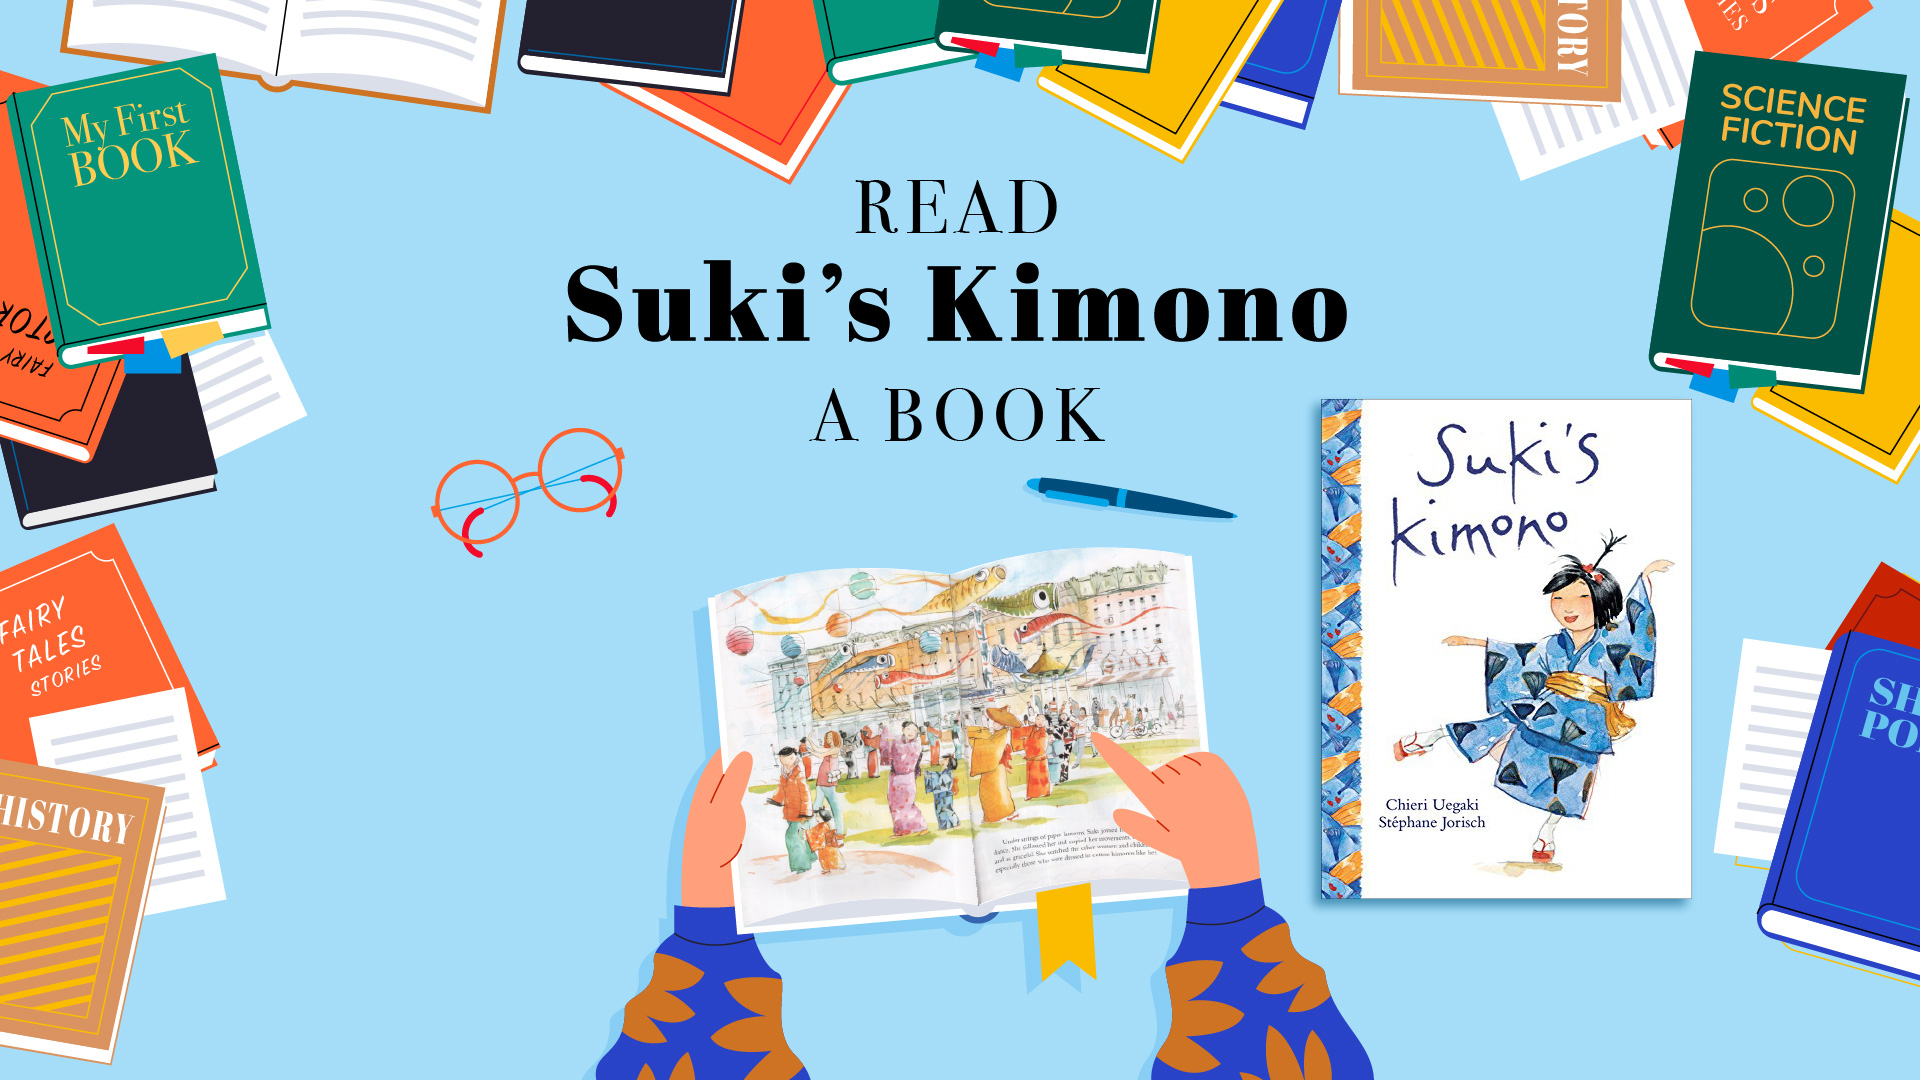 Books border, headline- first line: READ second line: Suki's Kimono third line: A BOOK graphics of orange glasses, blue pen, a person opening a book and point at the two spread pages from Suki's Kimono. The cover of Suki's Kimono on right side.